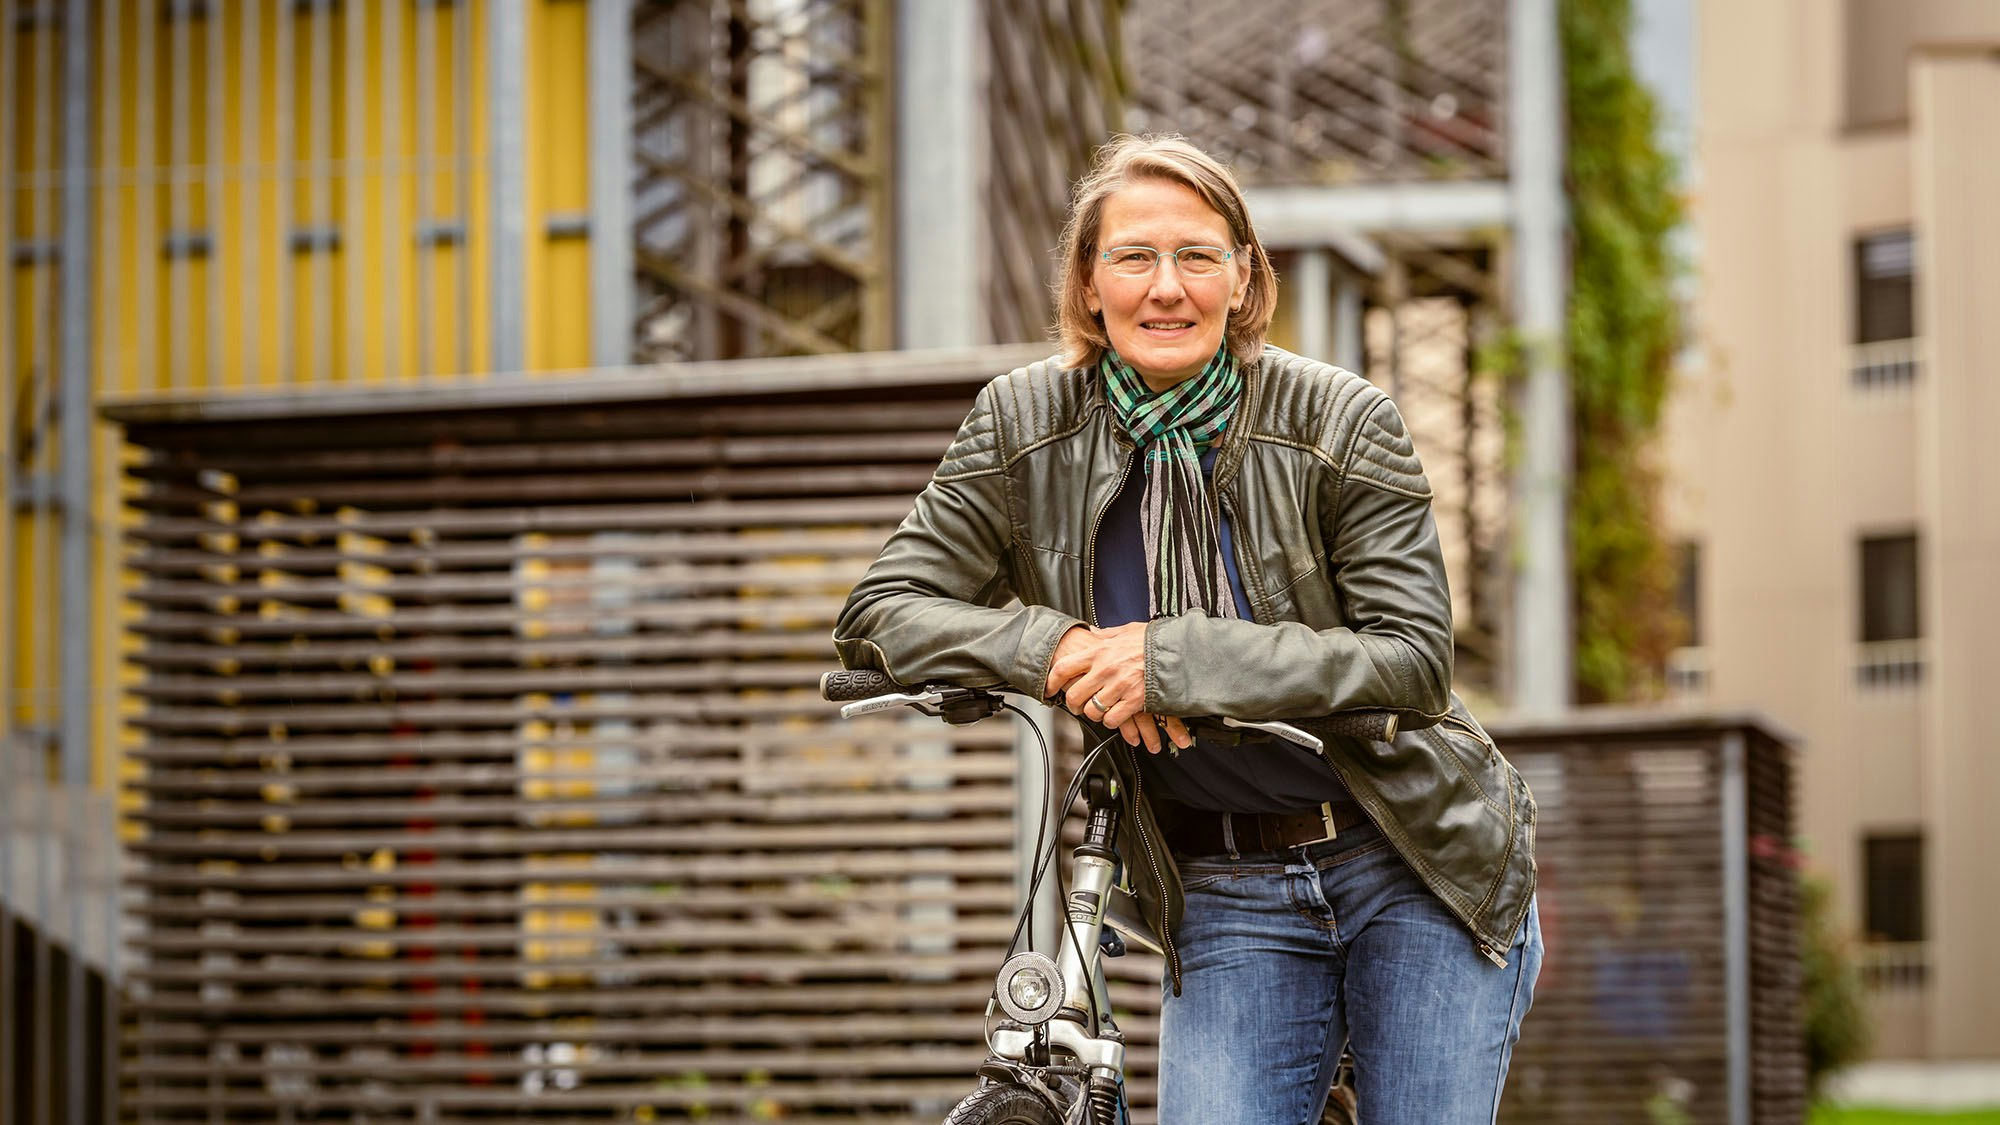 A woman in a leather jacket is standing with her bicycle in front of a residential building.